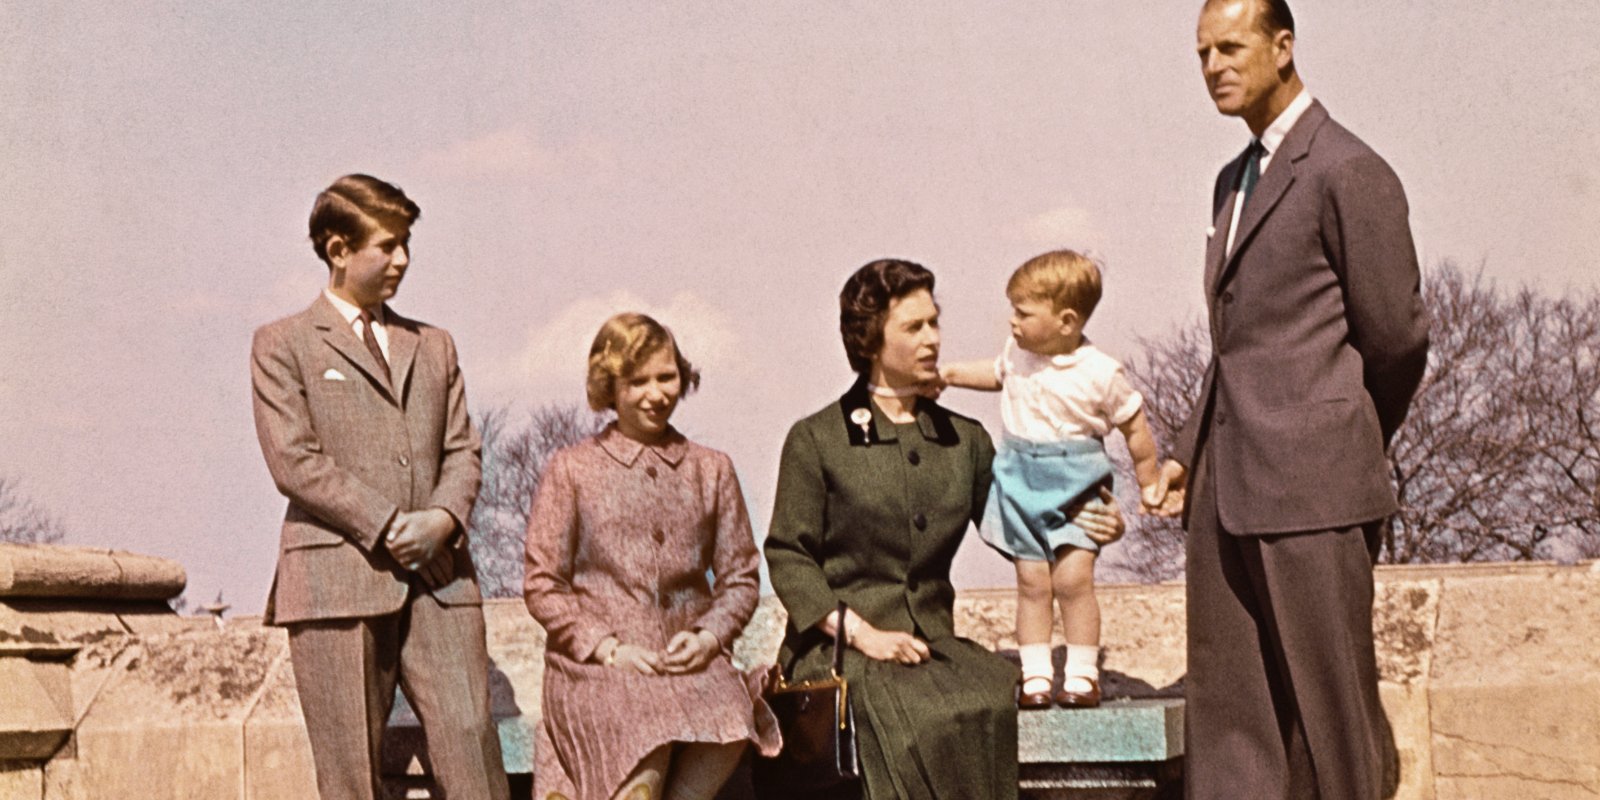 A photograph of the royal family in 1960.